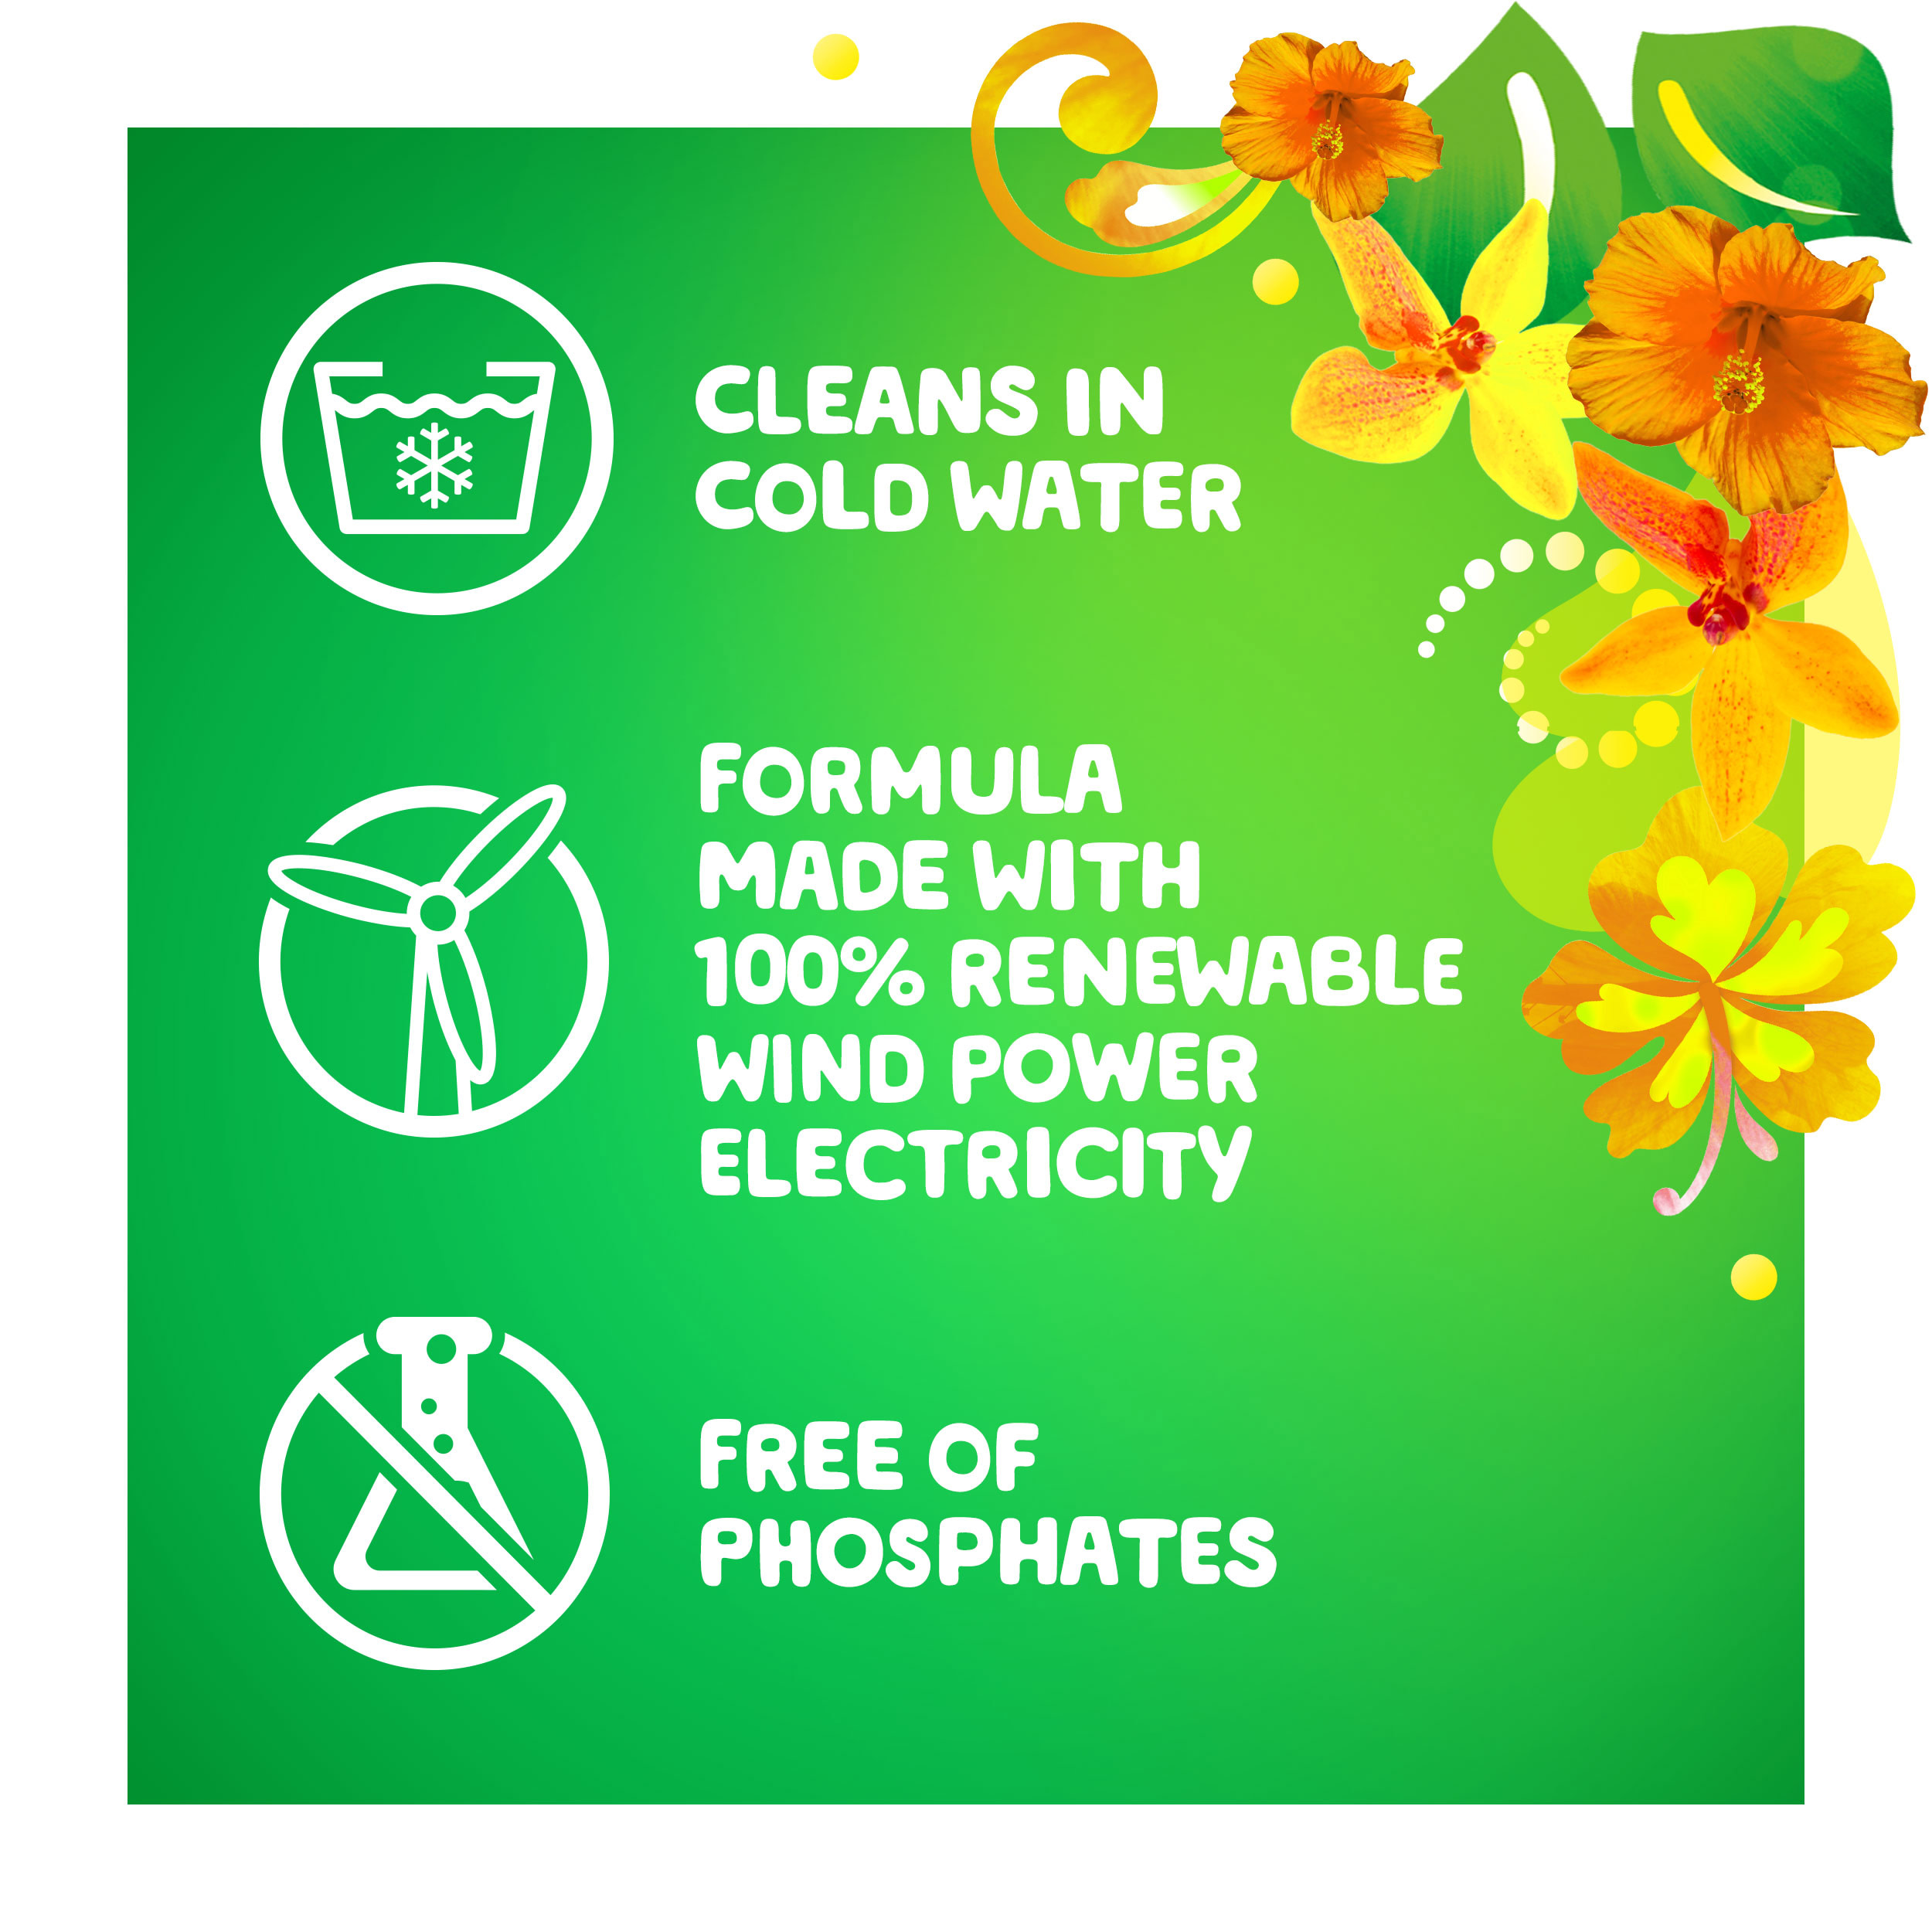 Gain Island Fresh Liquid Laundry Detergent cleans in cold water, the formula is made with 100% reneweable wind power electricity and it is free of phosphates